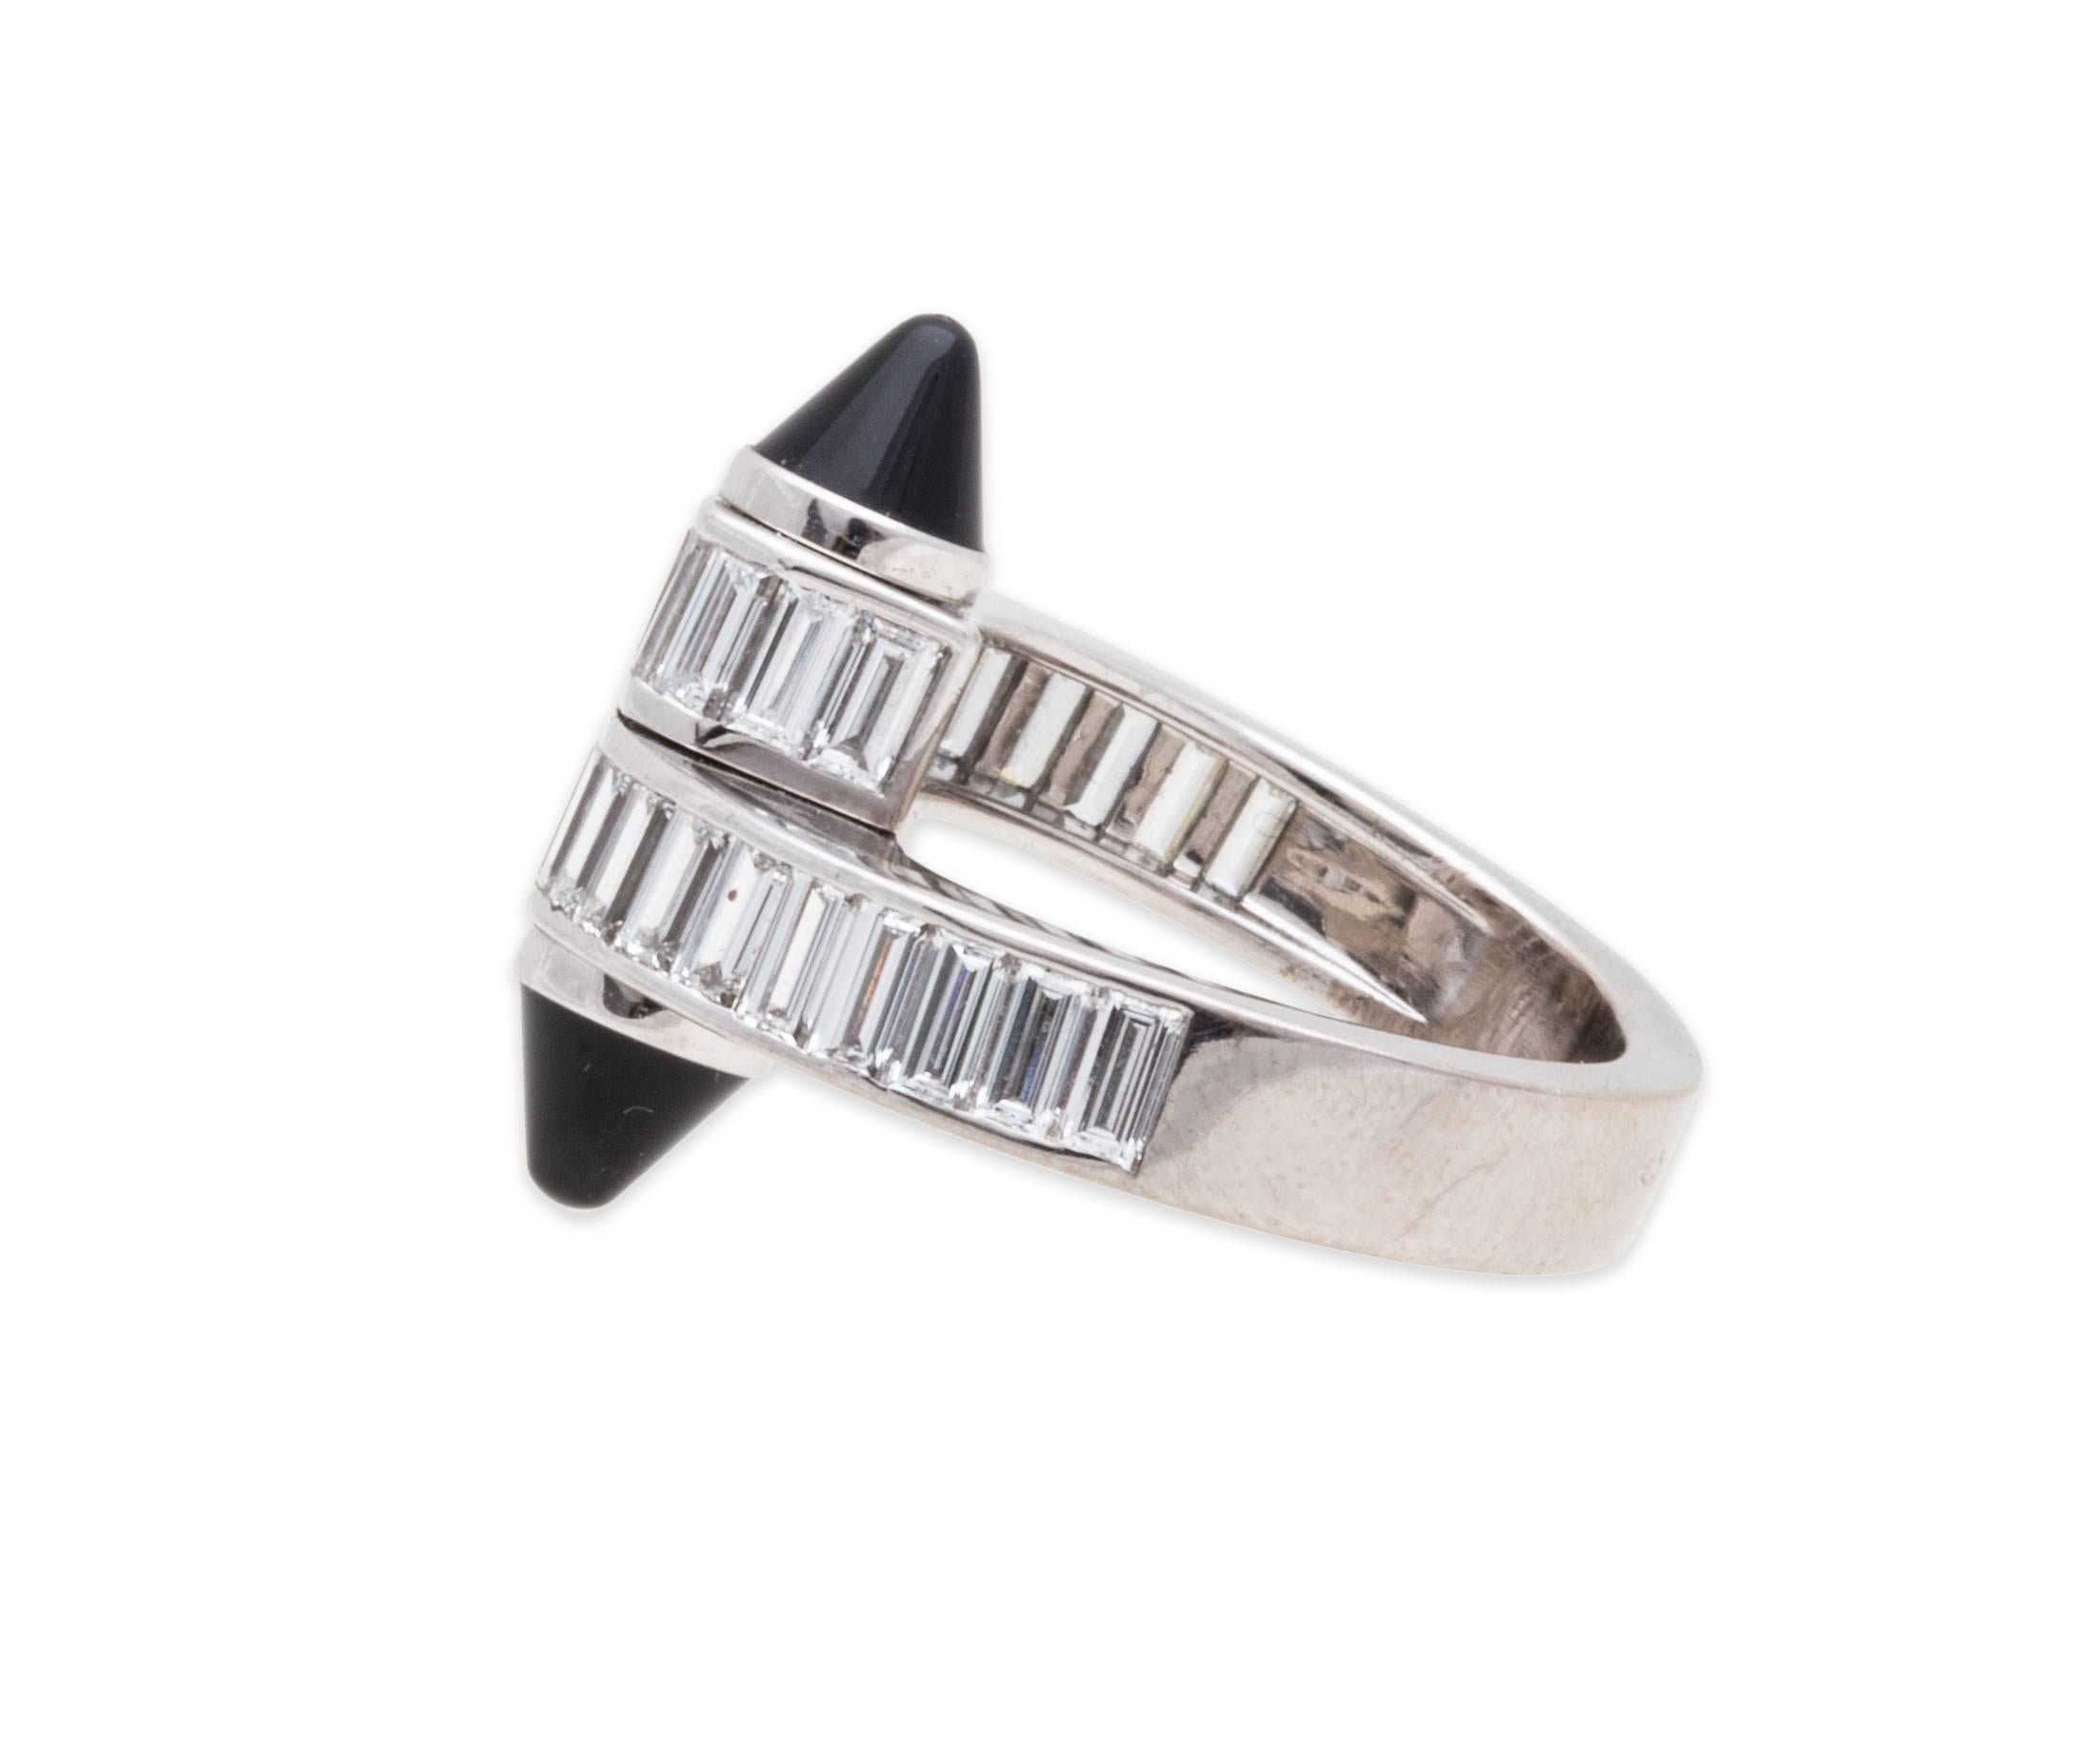 Cartier 18K White gold LOVE ring set with high quality Baguette Cut Diamonds and Black Onyx. Ring size 52 / USA  6.5